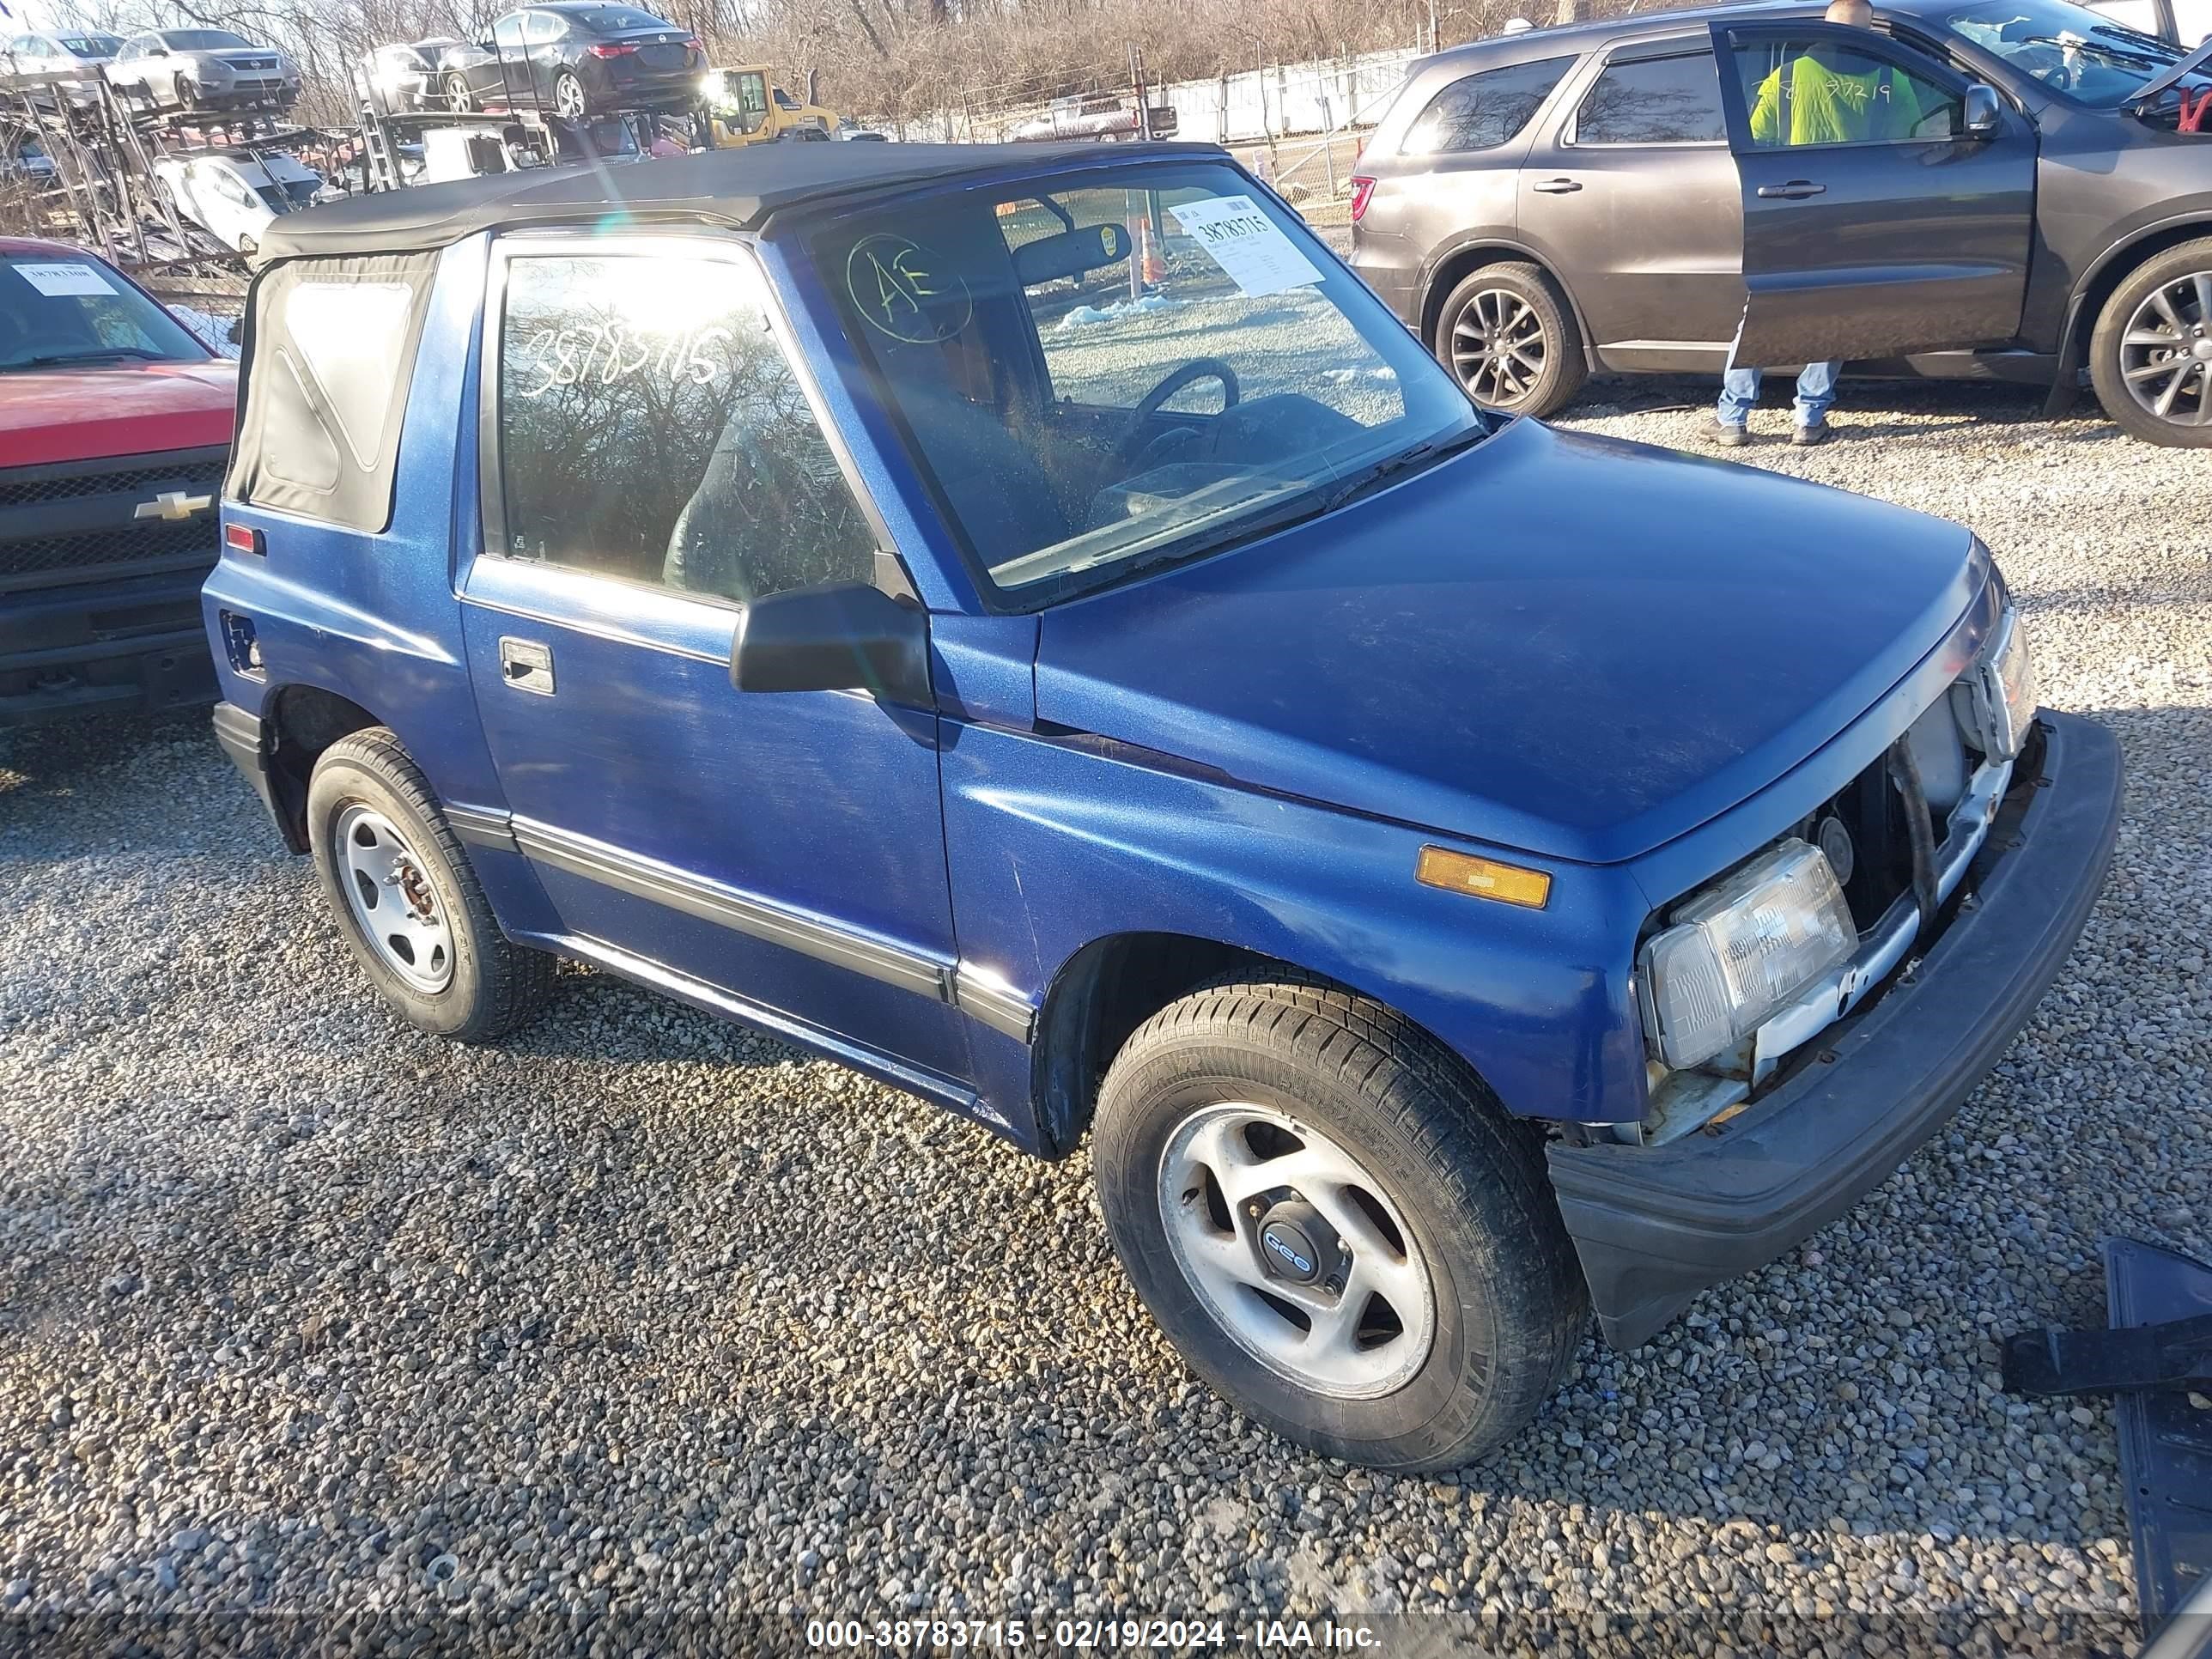 vin: 2CNBE186XS6919762 2CNBE186XS6919762 1995 geo tracker 1600 for Sale in 45417, 400 Cherokee Dr, Dayton, USA